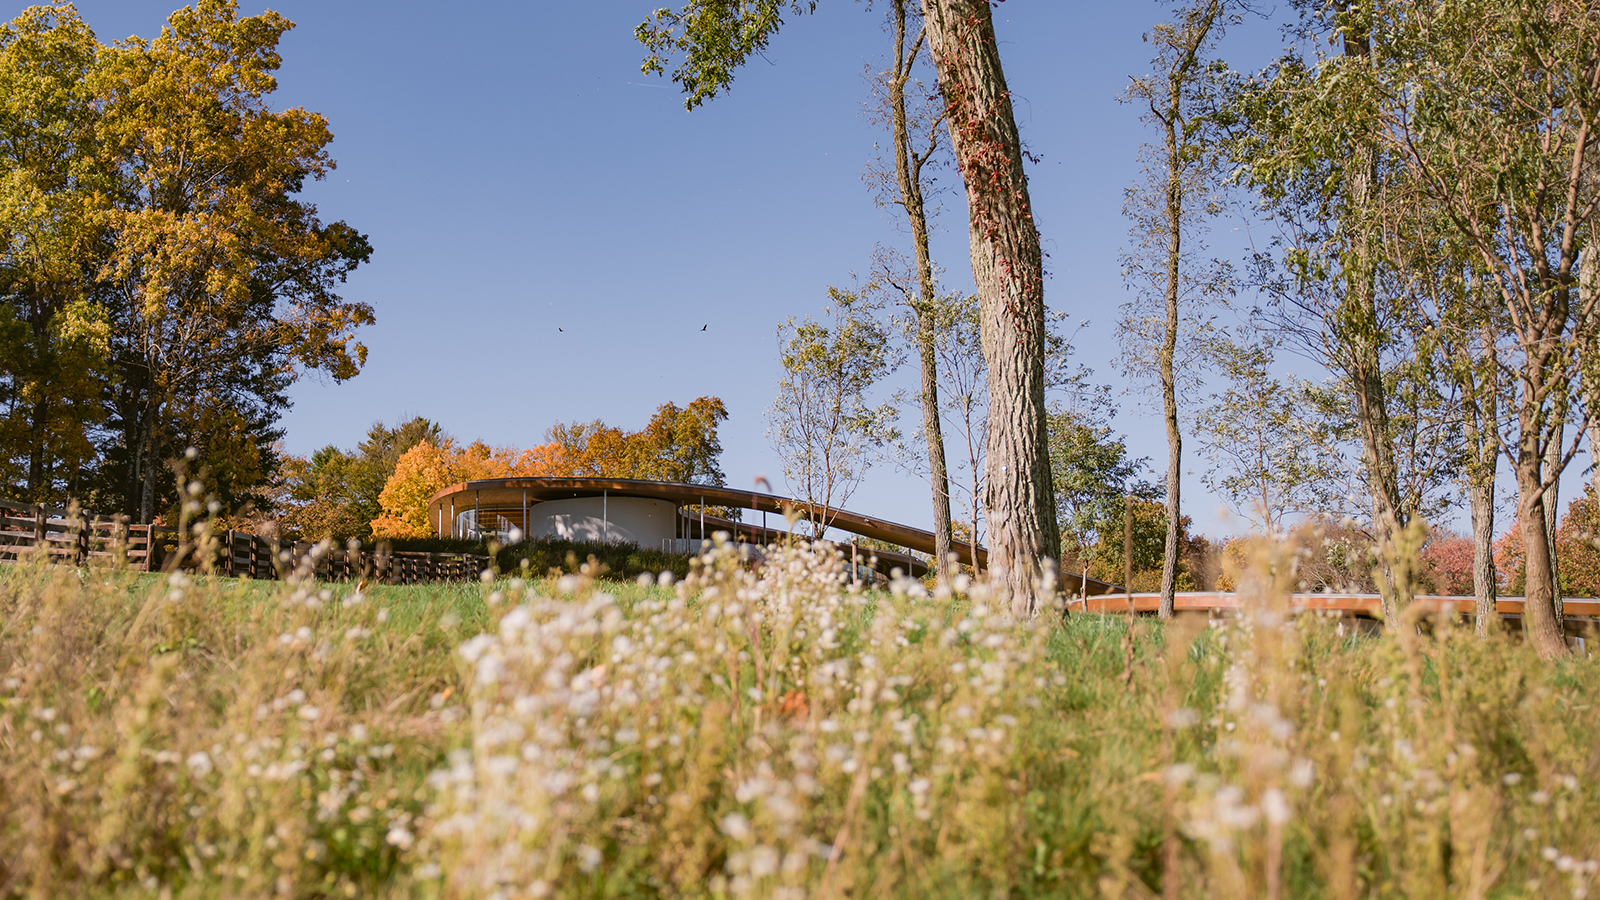 Native meadows and the River building at Grace Farms